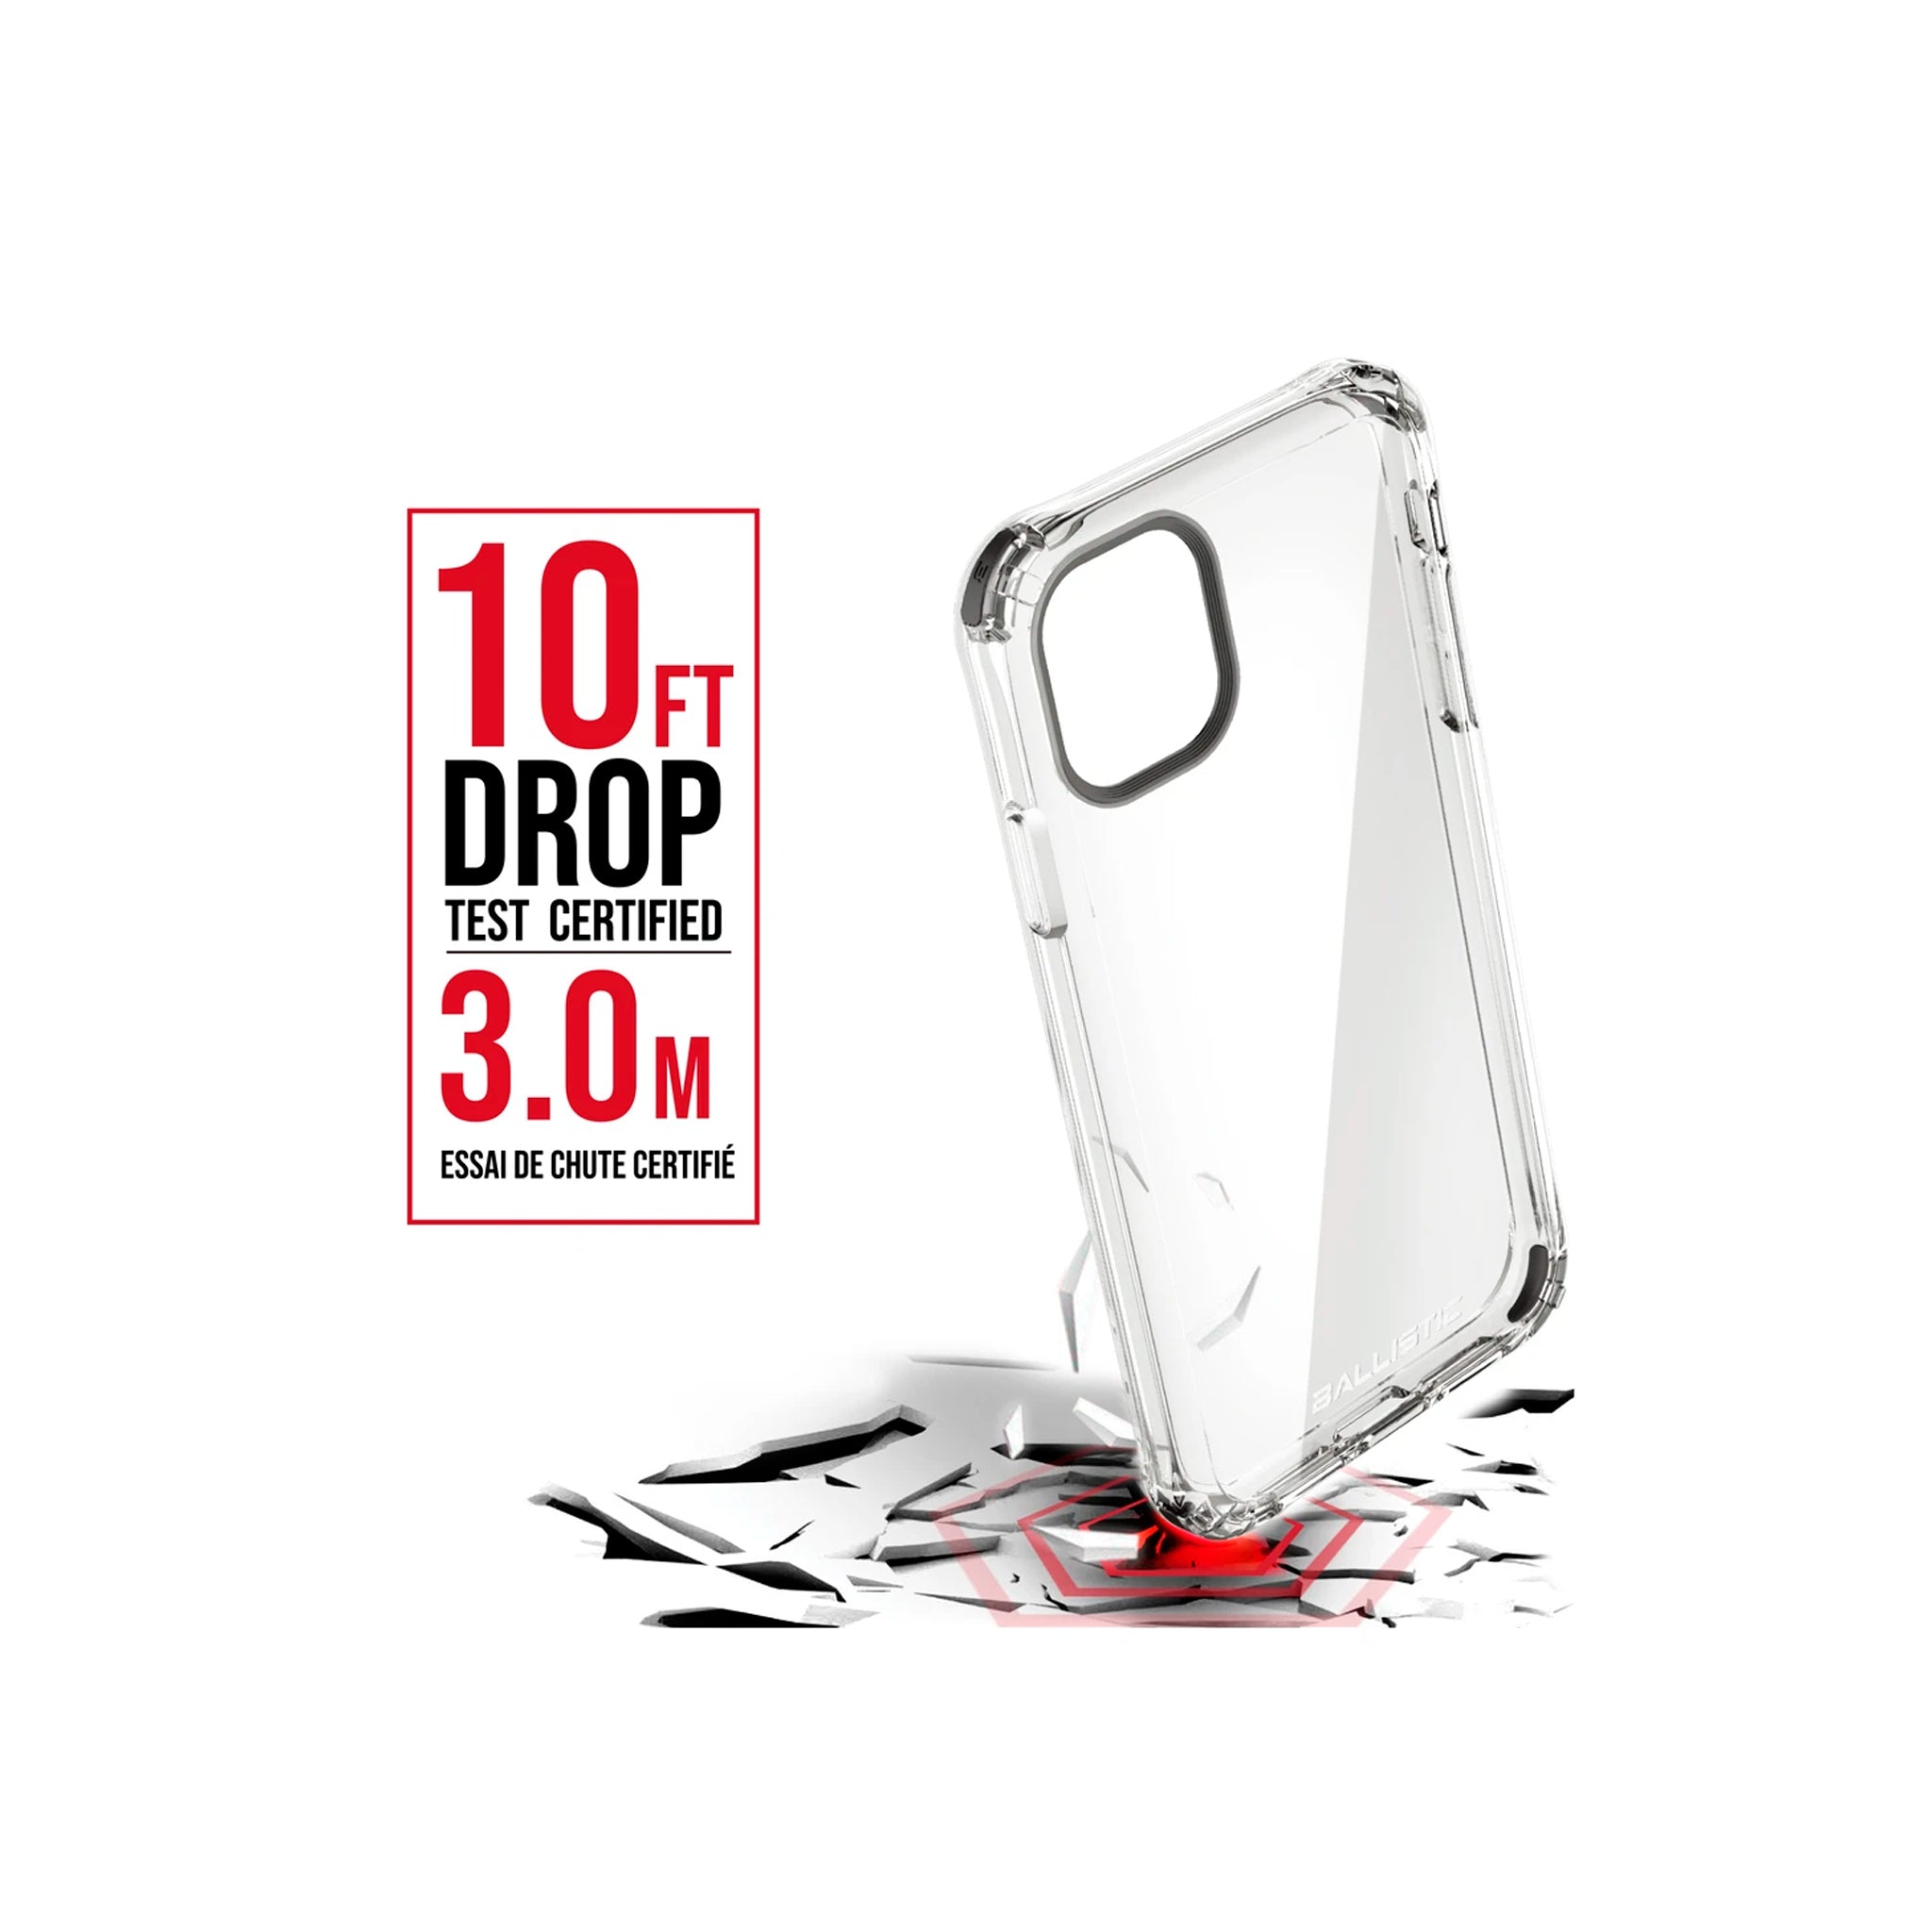 Ballistic - Jewel Series For iPhone 11 Pro Max  - Clear